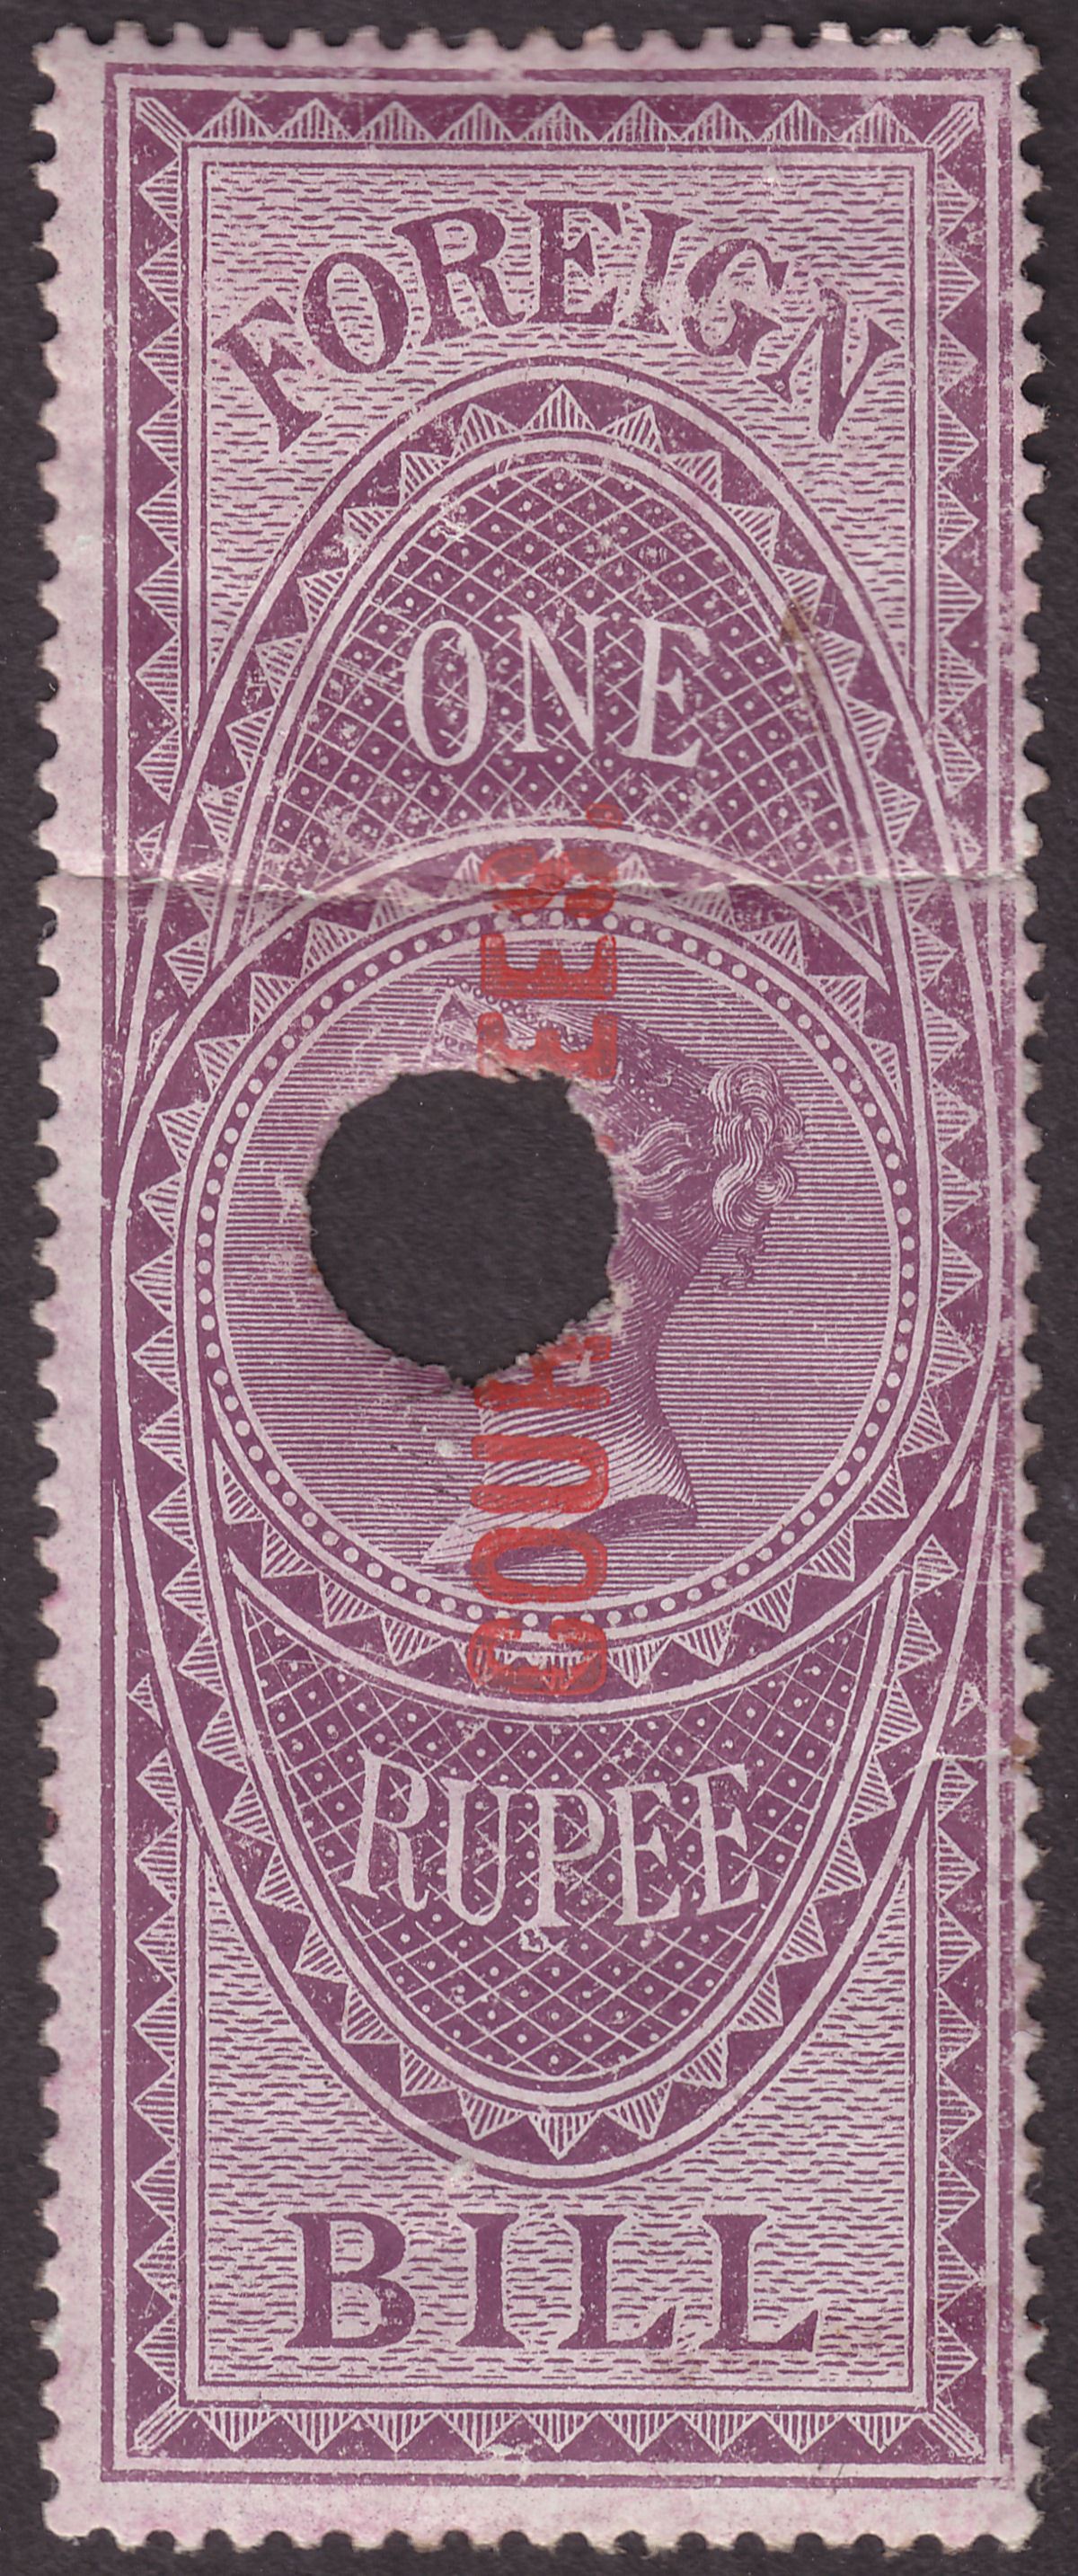 India 1870 QV Revenue Court Fees Overprint Up on Foreign Bill 1r Used BF51a